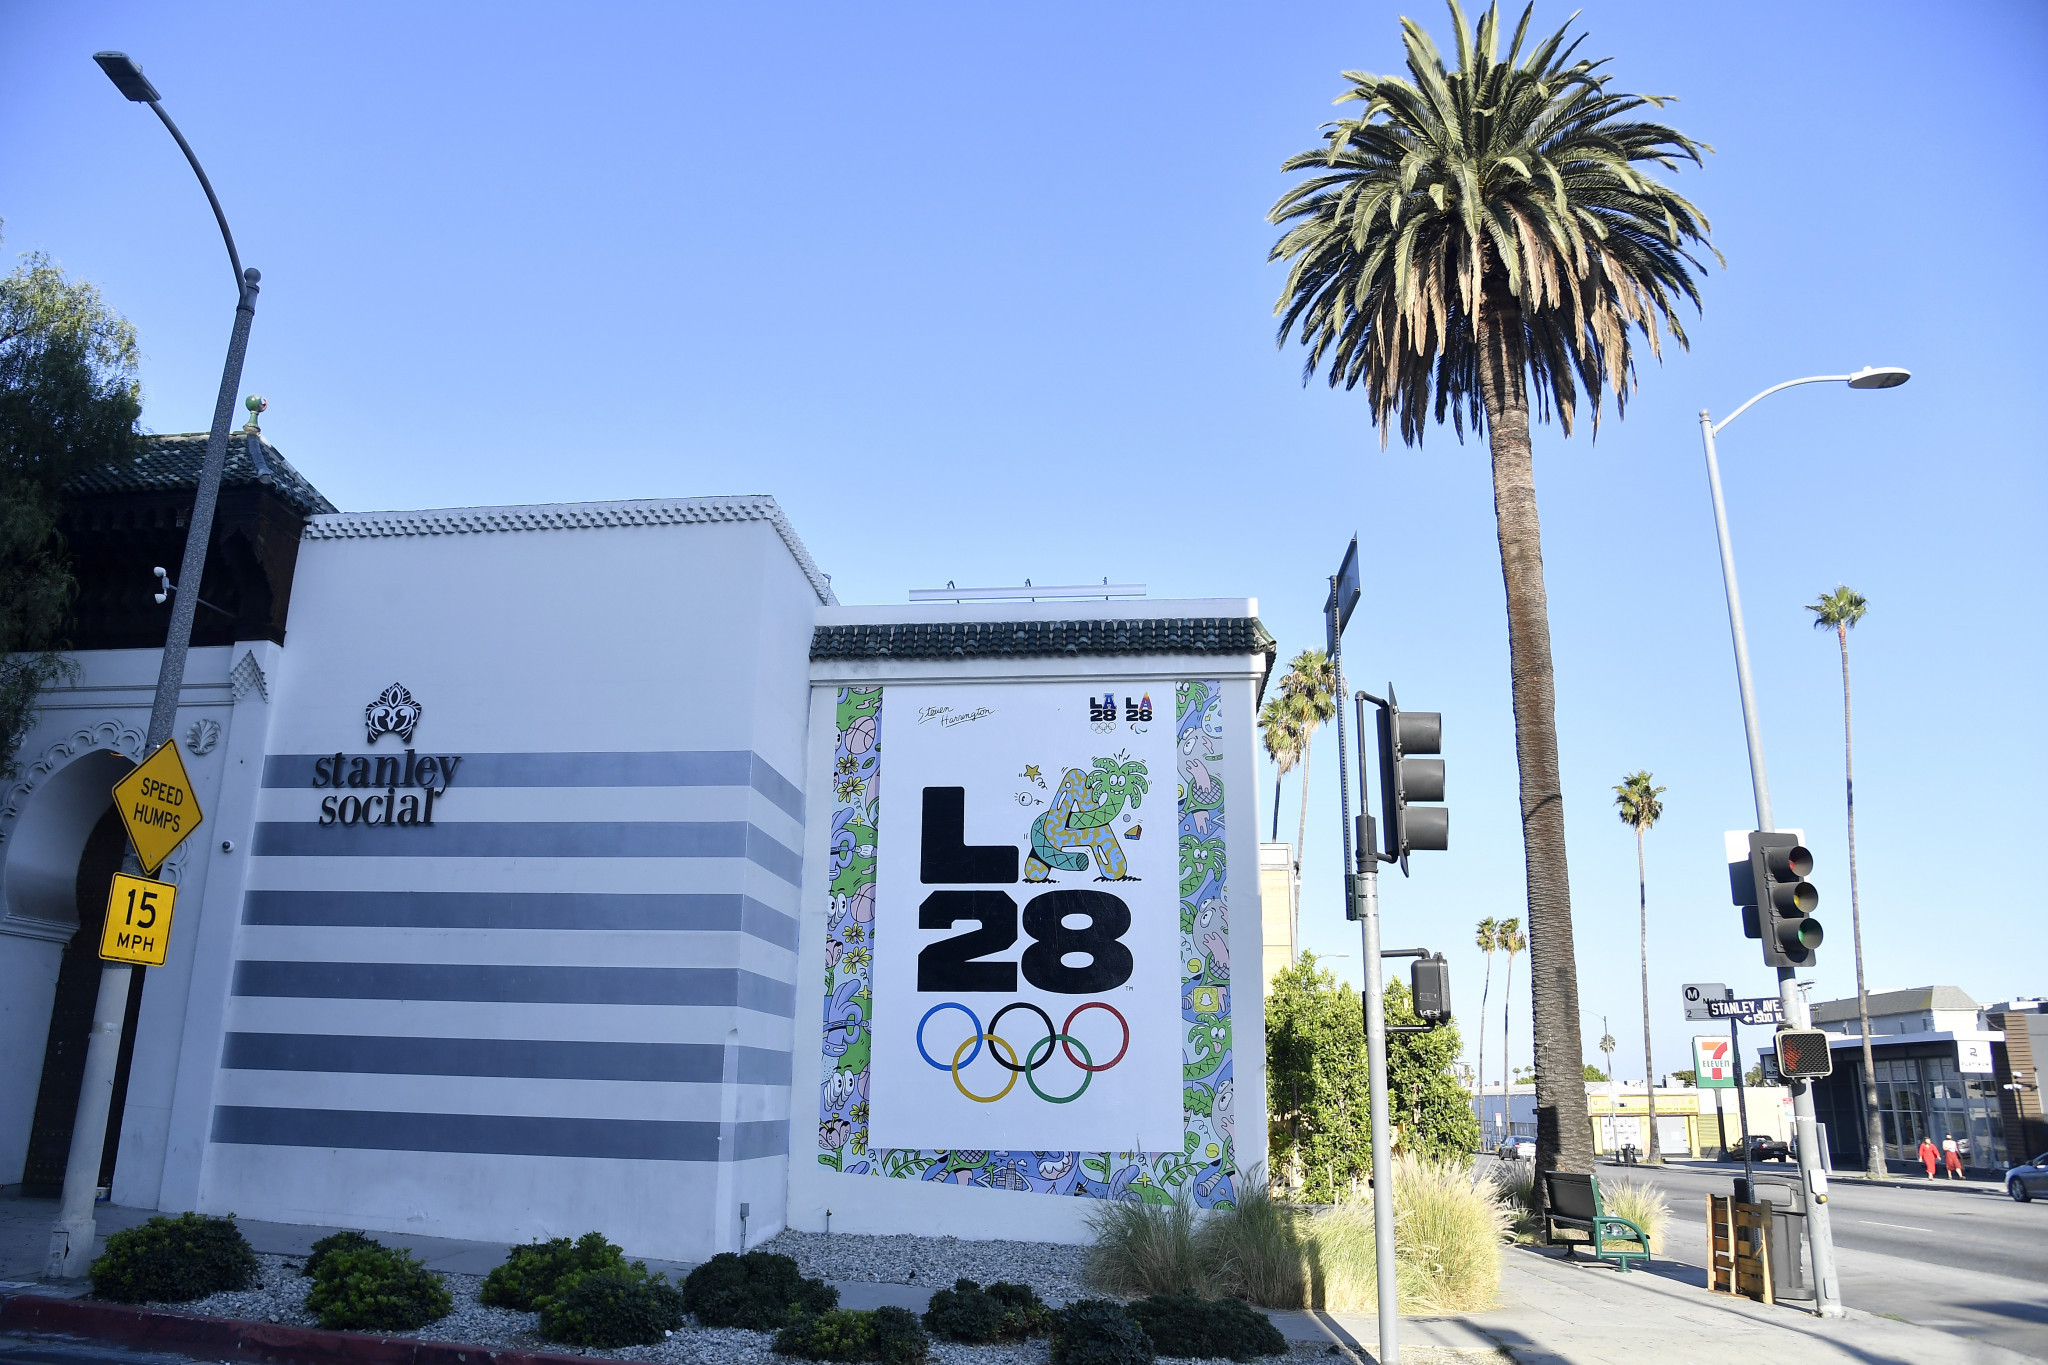 IFAF is targeting inclusion  at the Los Angeles 2028 Olympics for flag football ©Getty Images